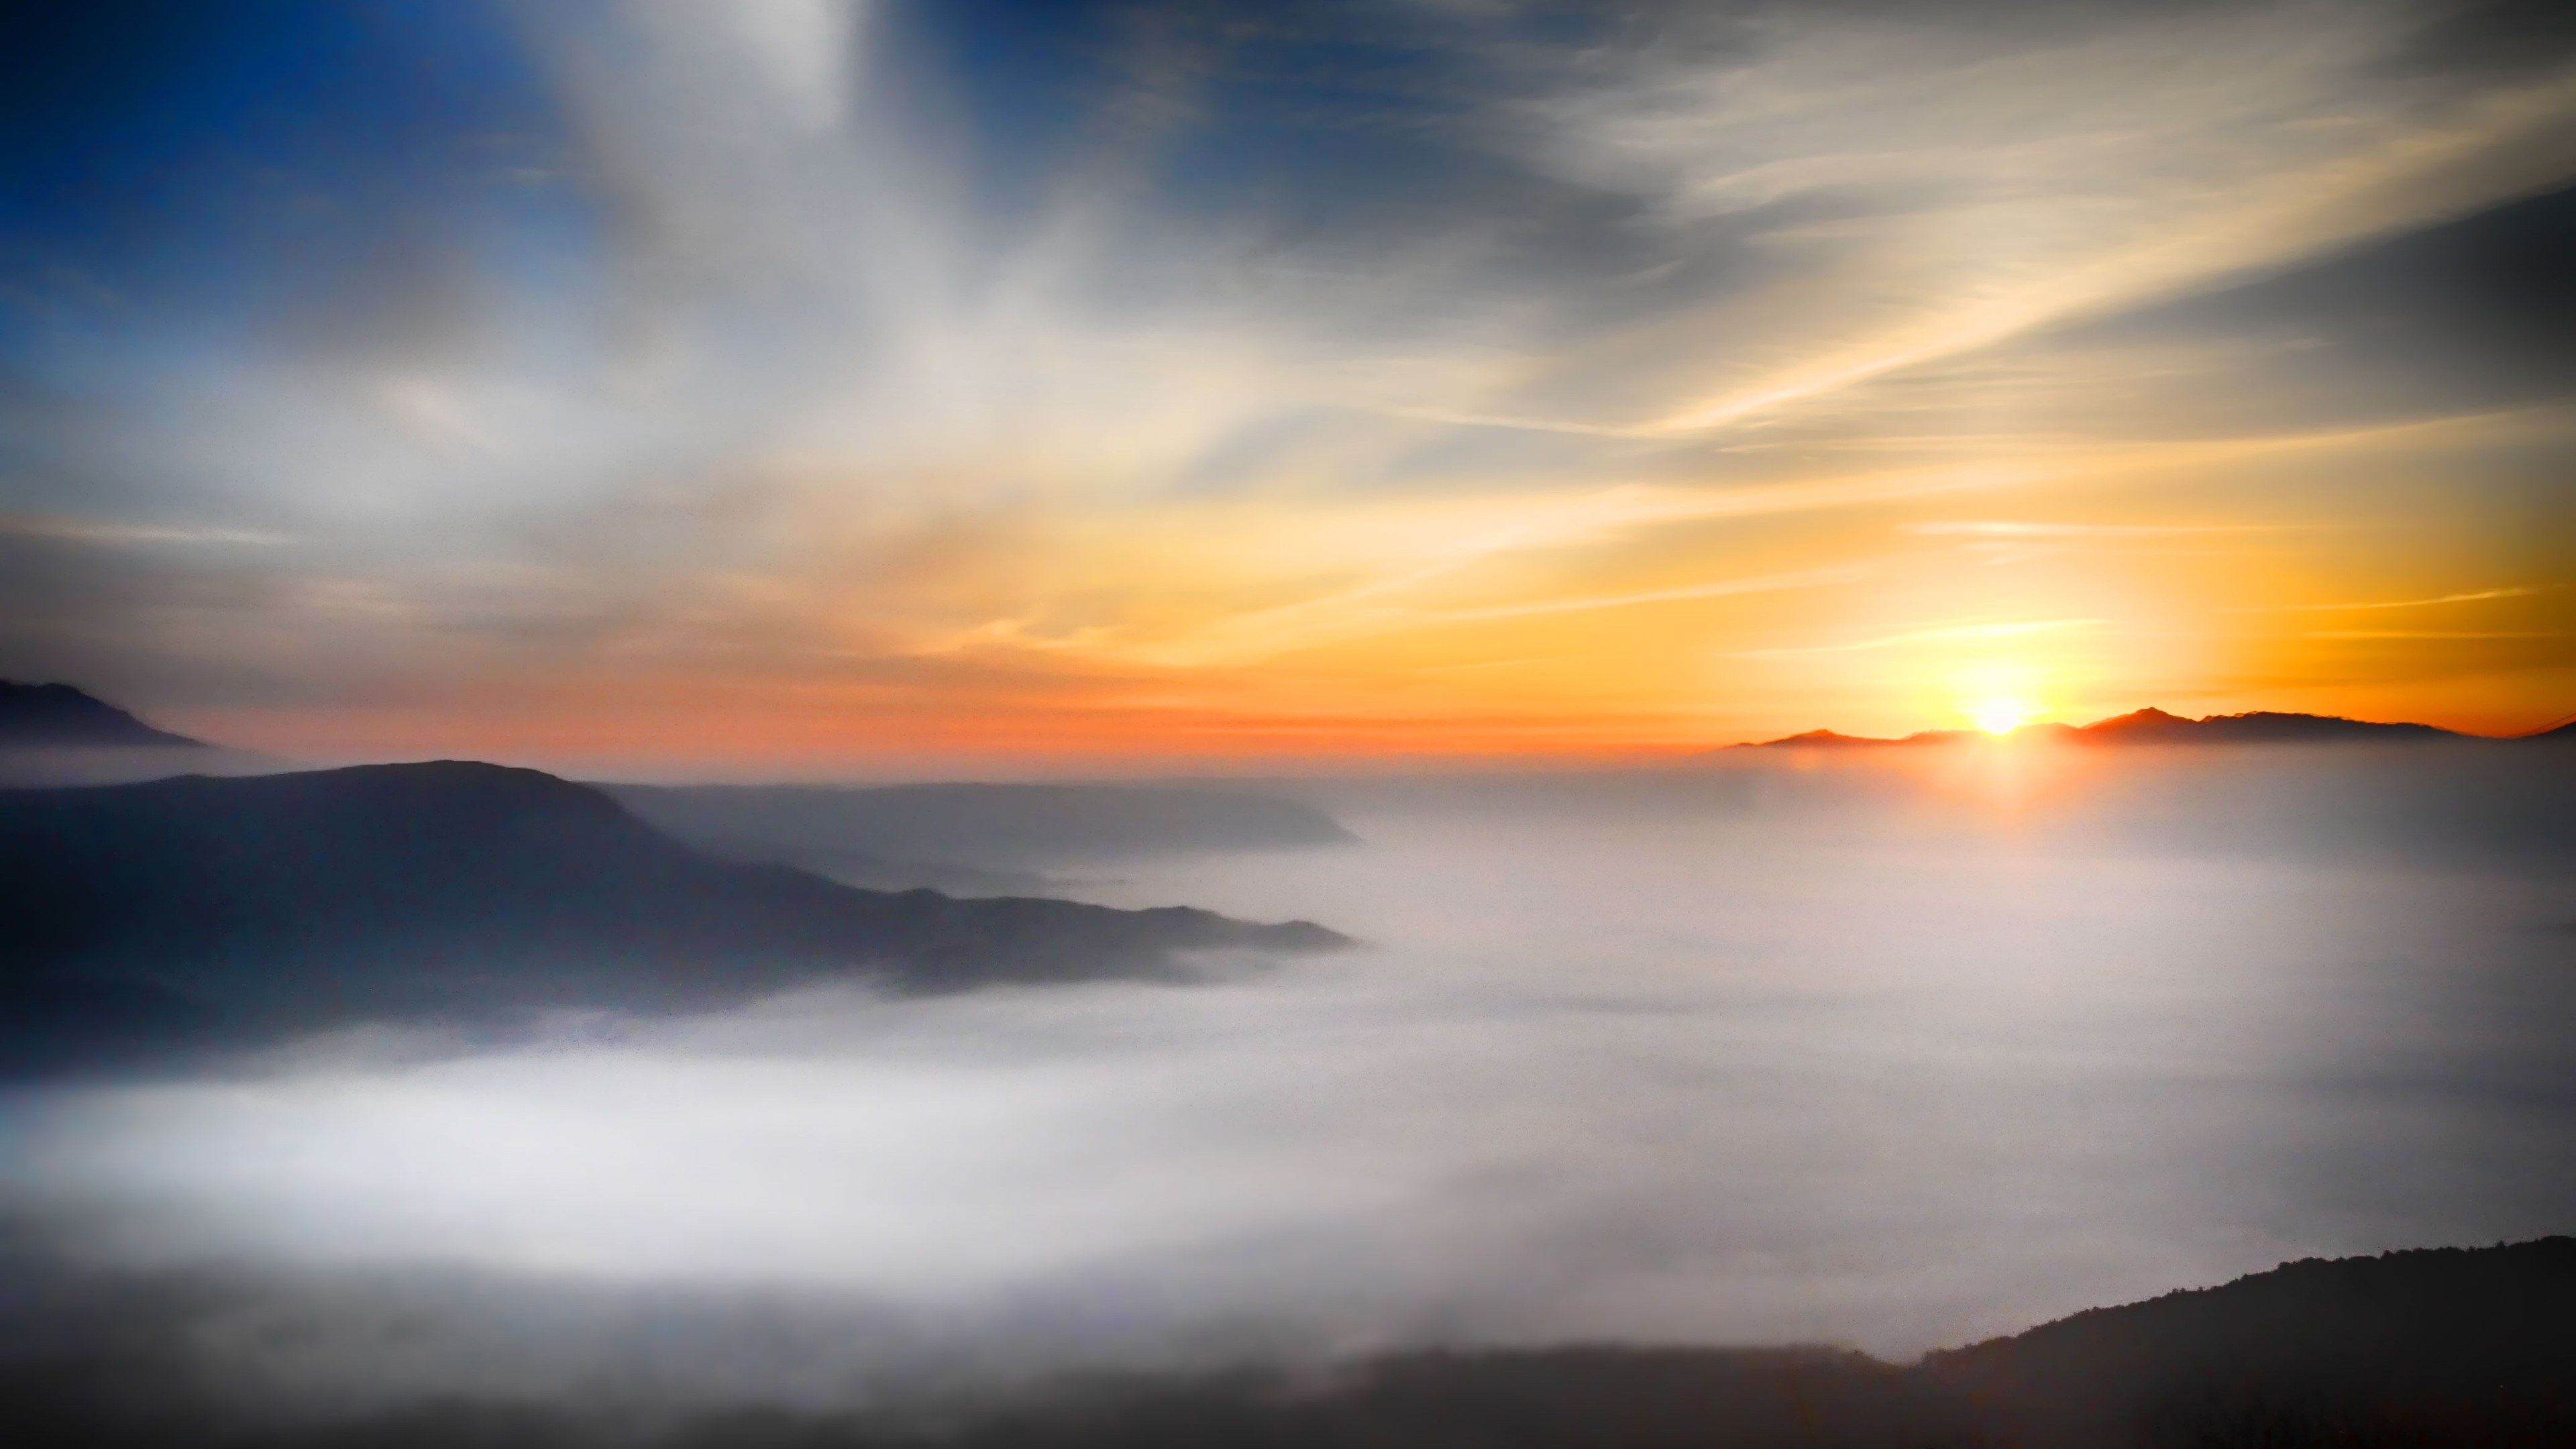 sea of clouds 4k 1540135110 - Sea Of Clouds 4k - sea of clouds wallpapers, nature wallpapers, mountains wallpapers, hd-wallpapers, clouds wallpapers, 4k-wallpapers